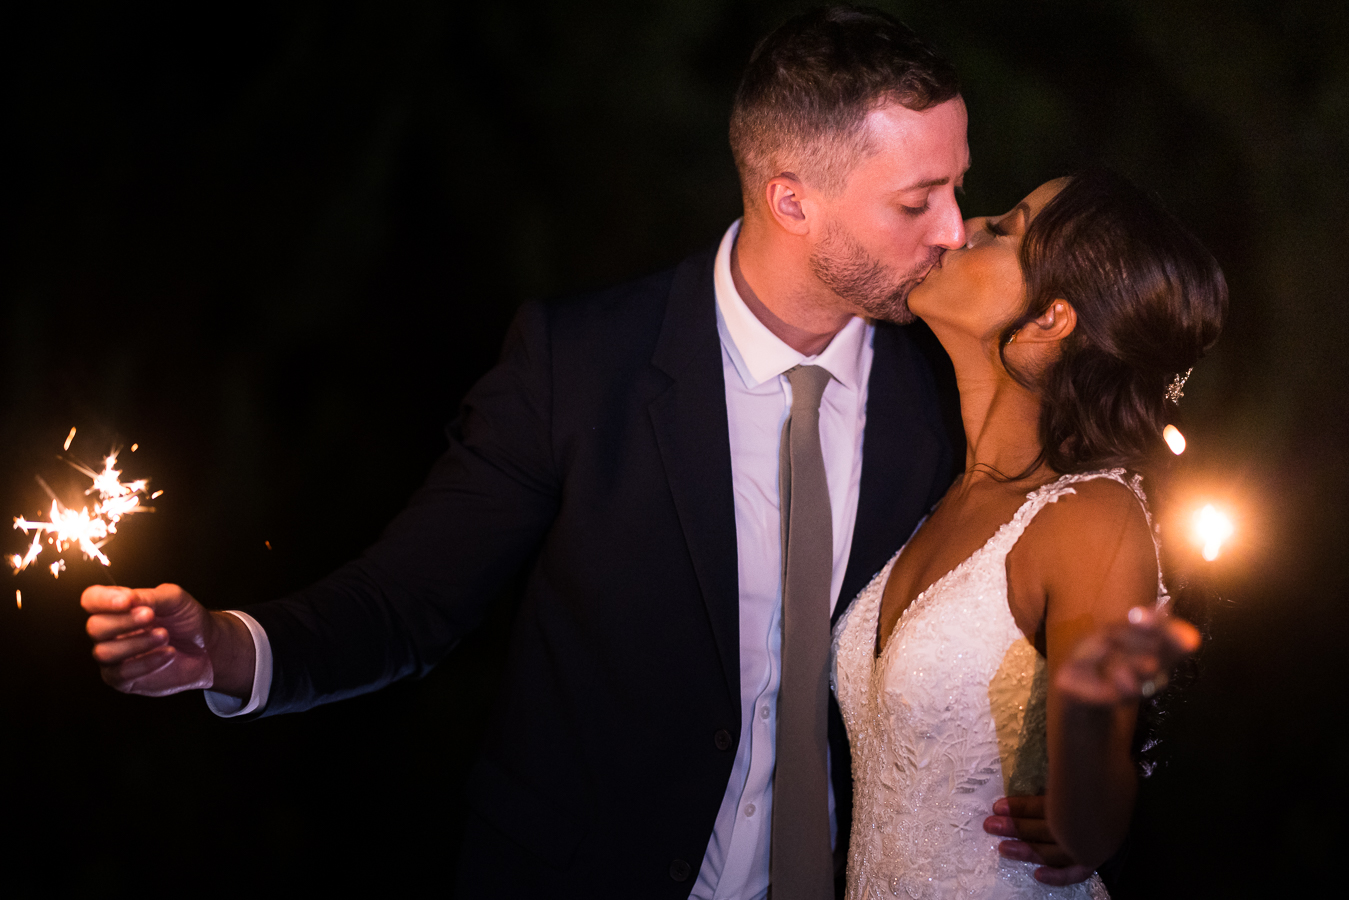 dc wedding photographer, lisa rhinehart, captures this end of the night shot of the bride and groom as they share a kiss together while holding sparklers at the end of their st francis hall multicultural dc wedding reception 